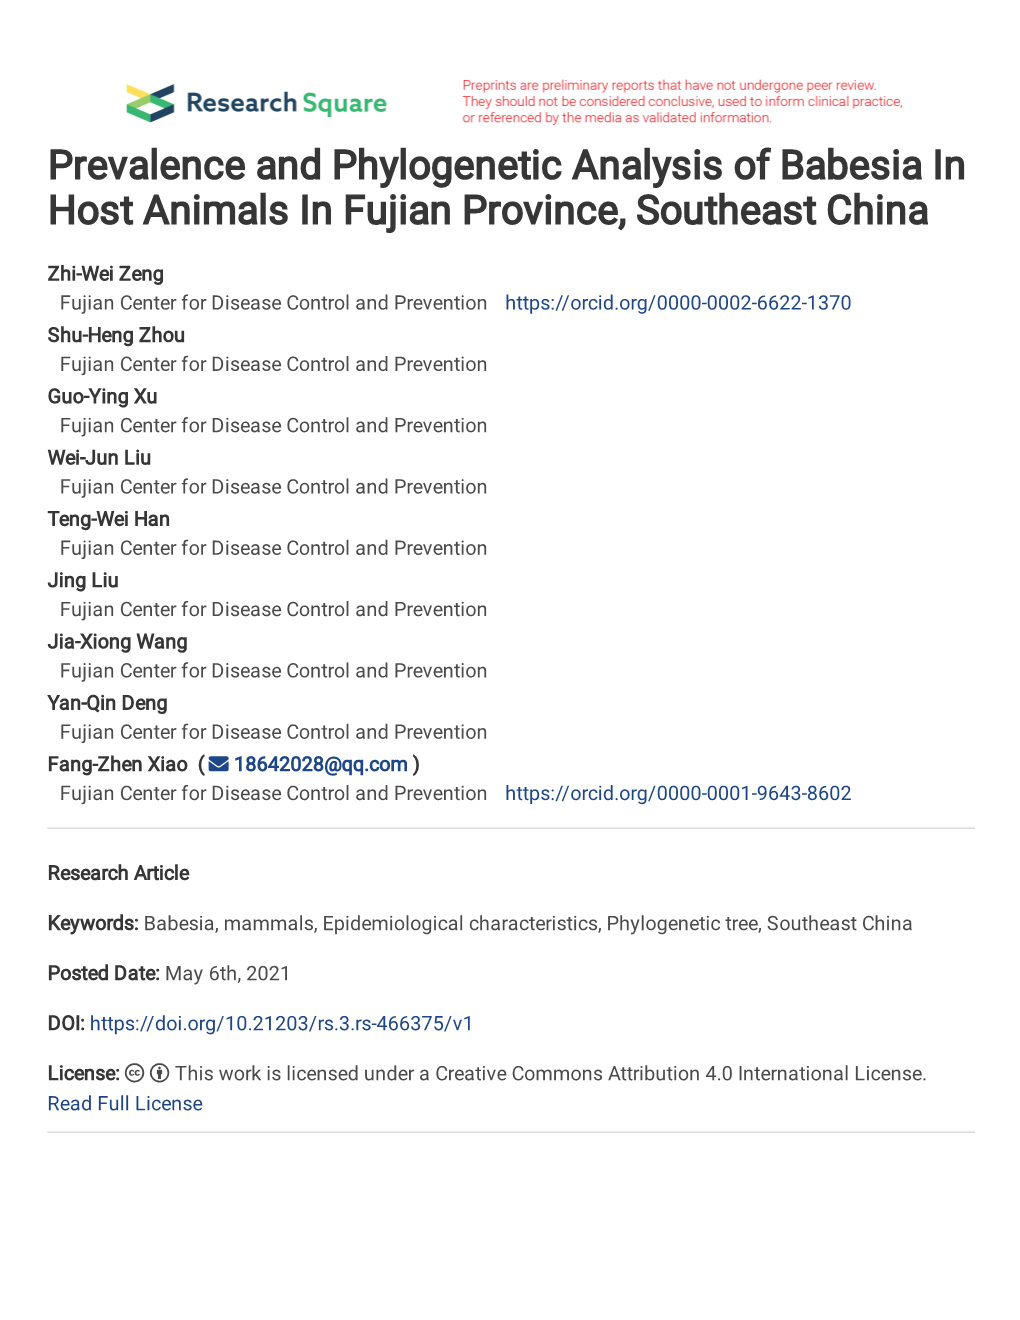 Prevalence and Phylogenetic Analysis of Babesia in Host Animals in Fujian Province, Southeast China